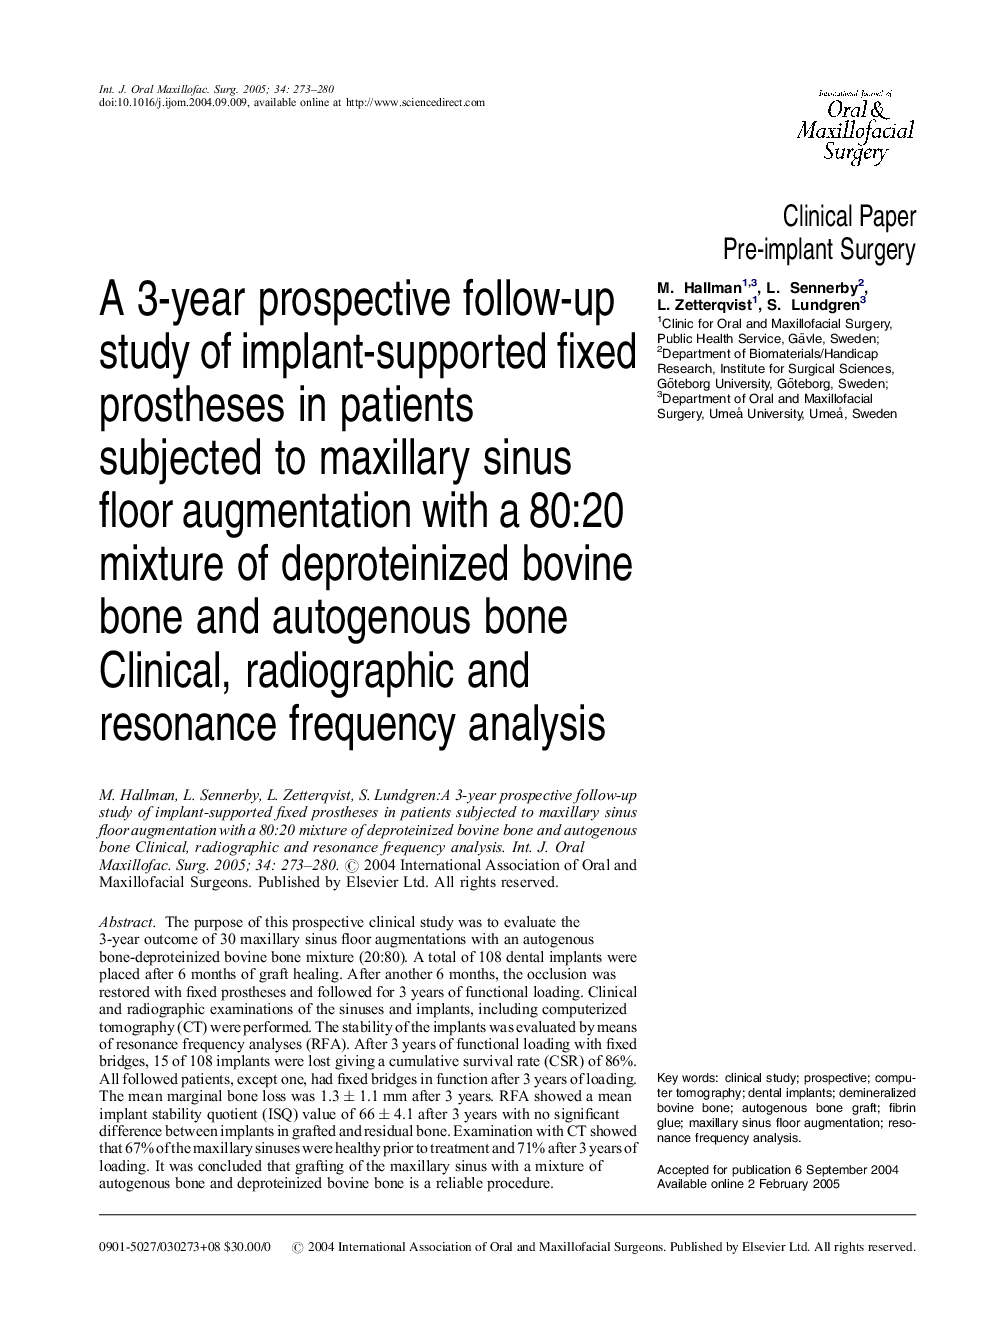 A 3-year prospective follow-up study of implant-supported fixed prostheses in patients subjected to maxillary sinus floor augmentation with a 80:20 mixture of deproteinized bovine bone and autogenous bone